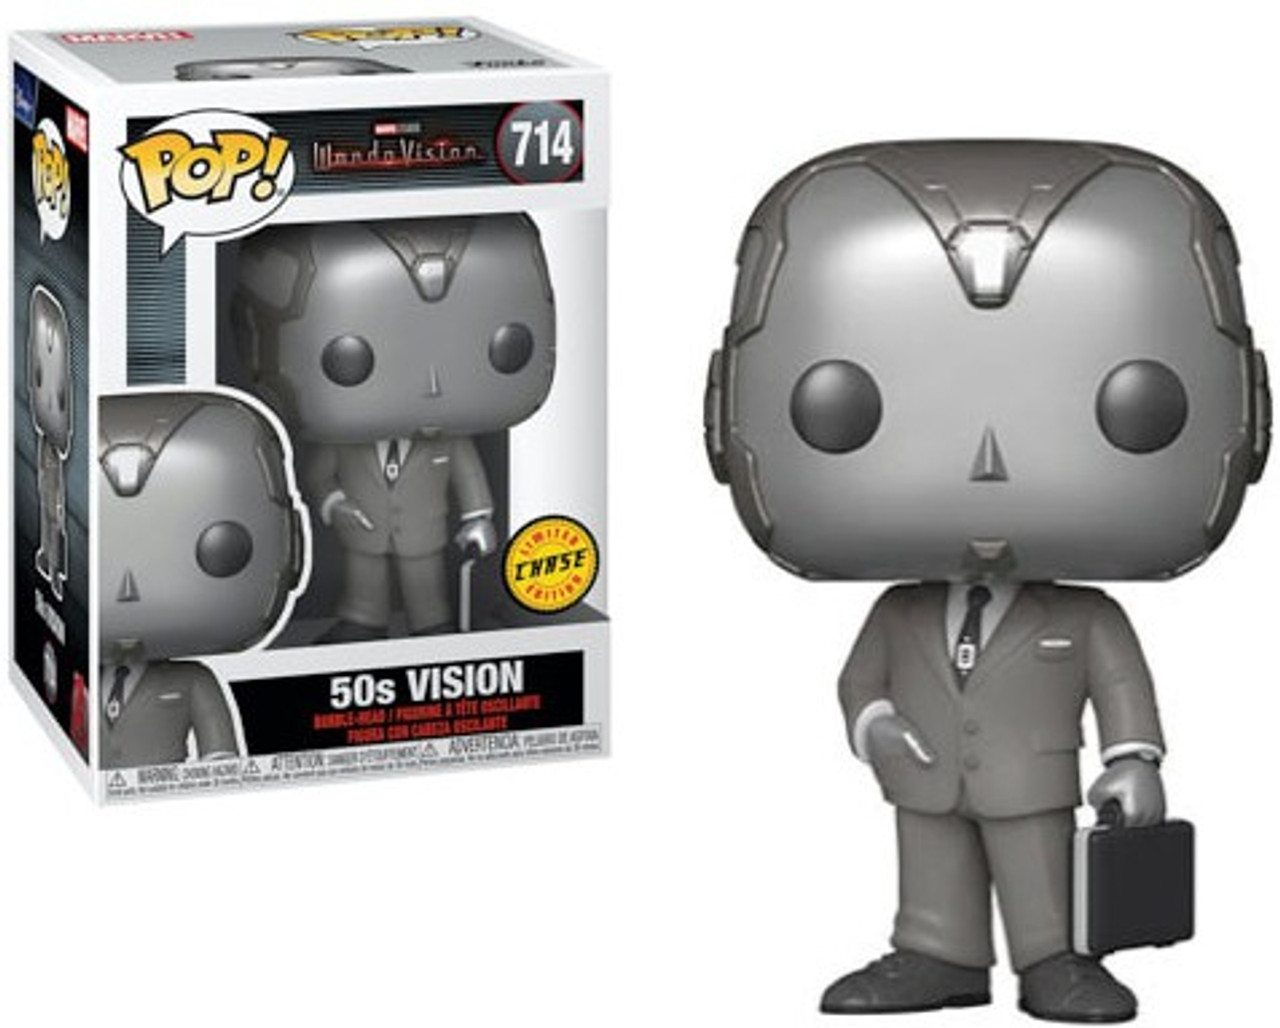 Funko Pop Vision 50s Black and White Chase Figure with Robot//Andriod Head WandaVision